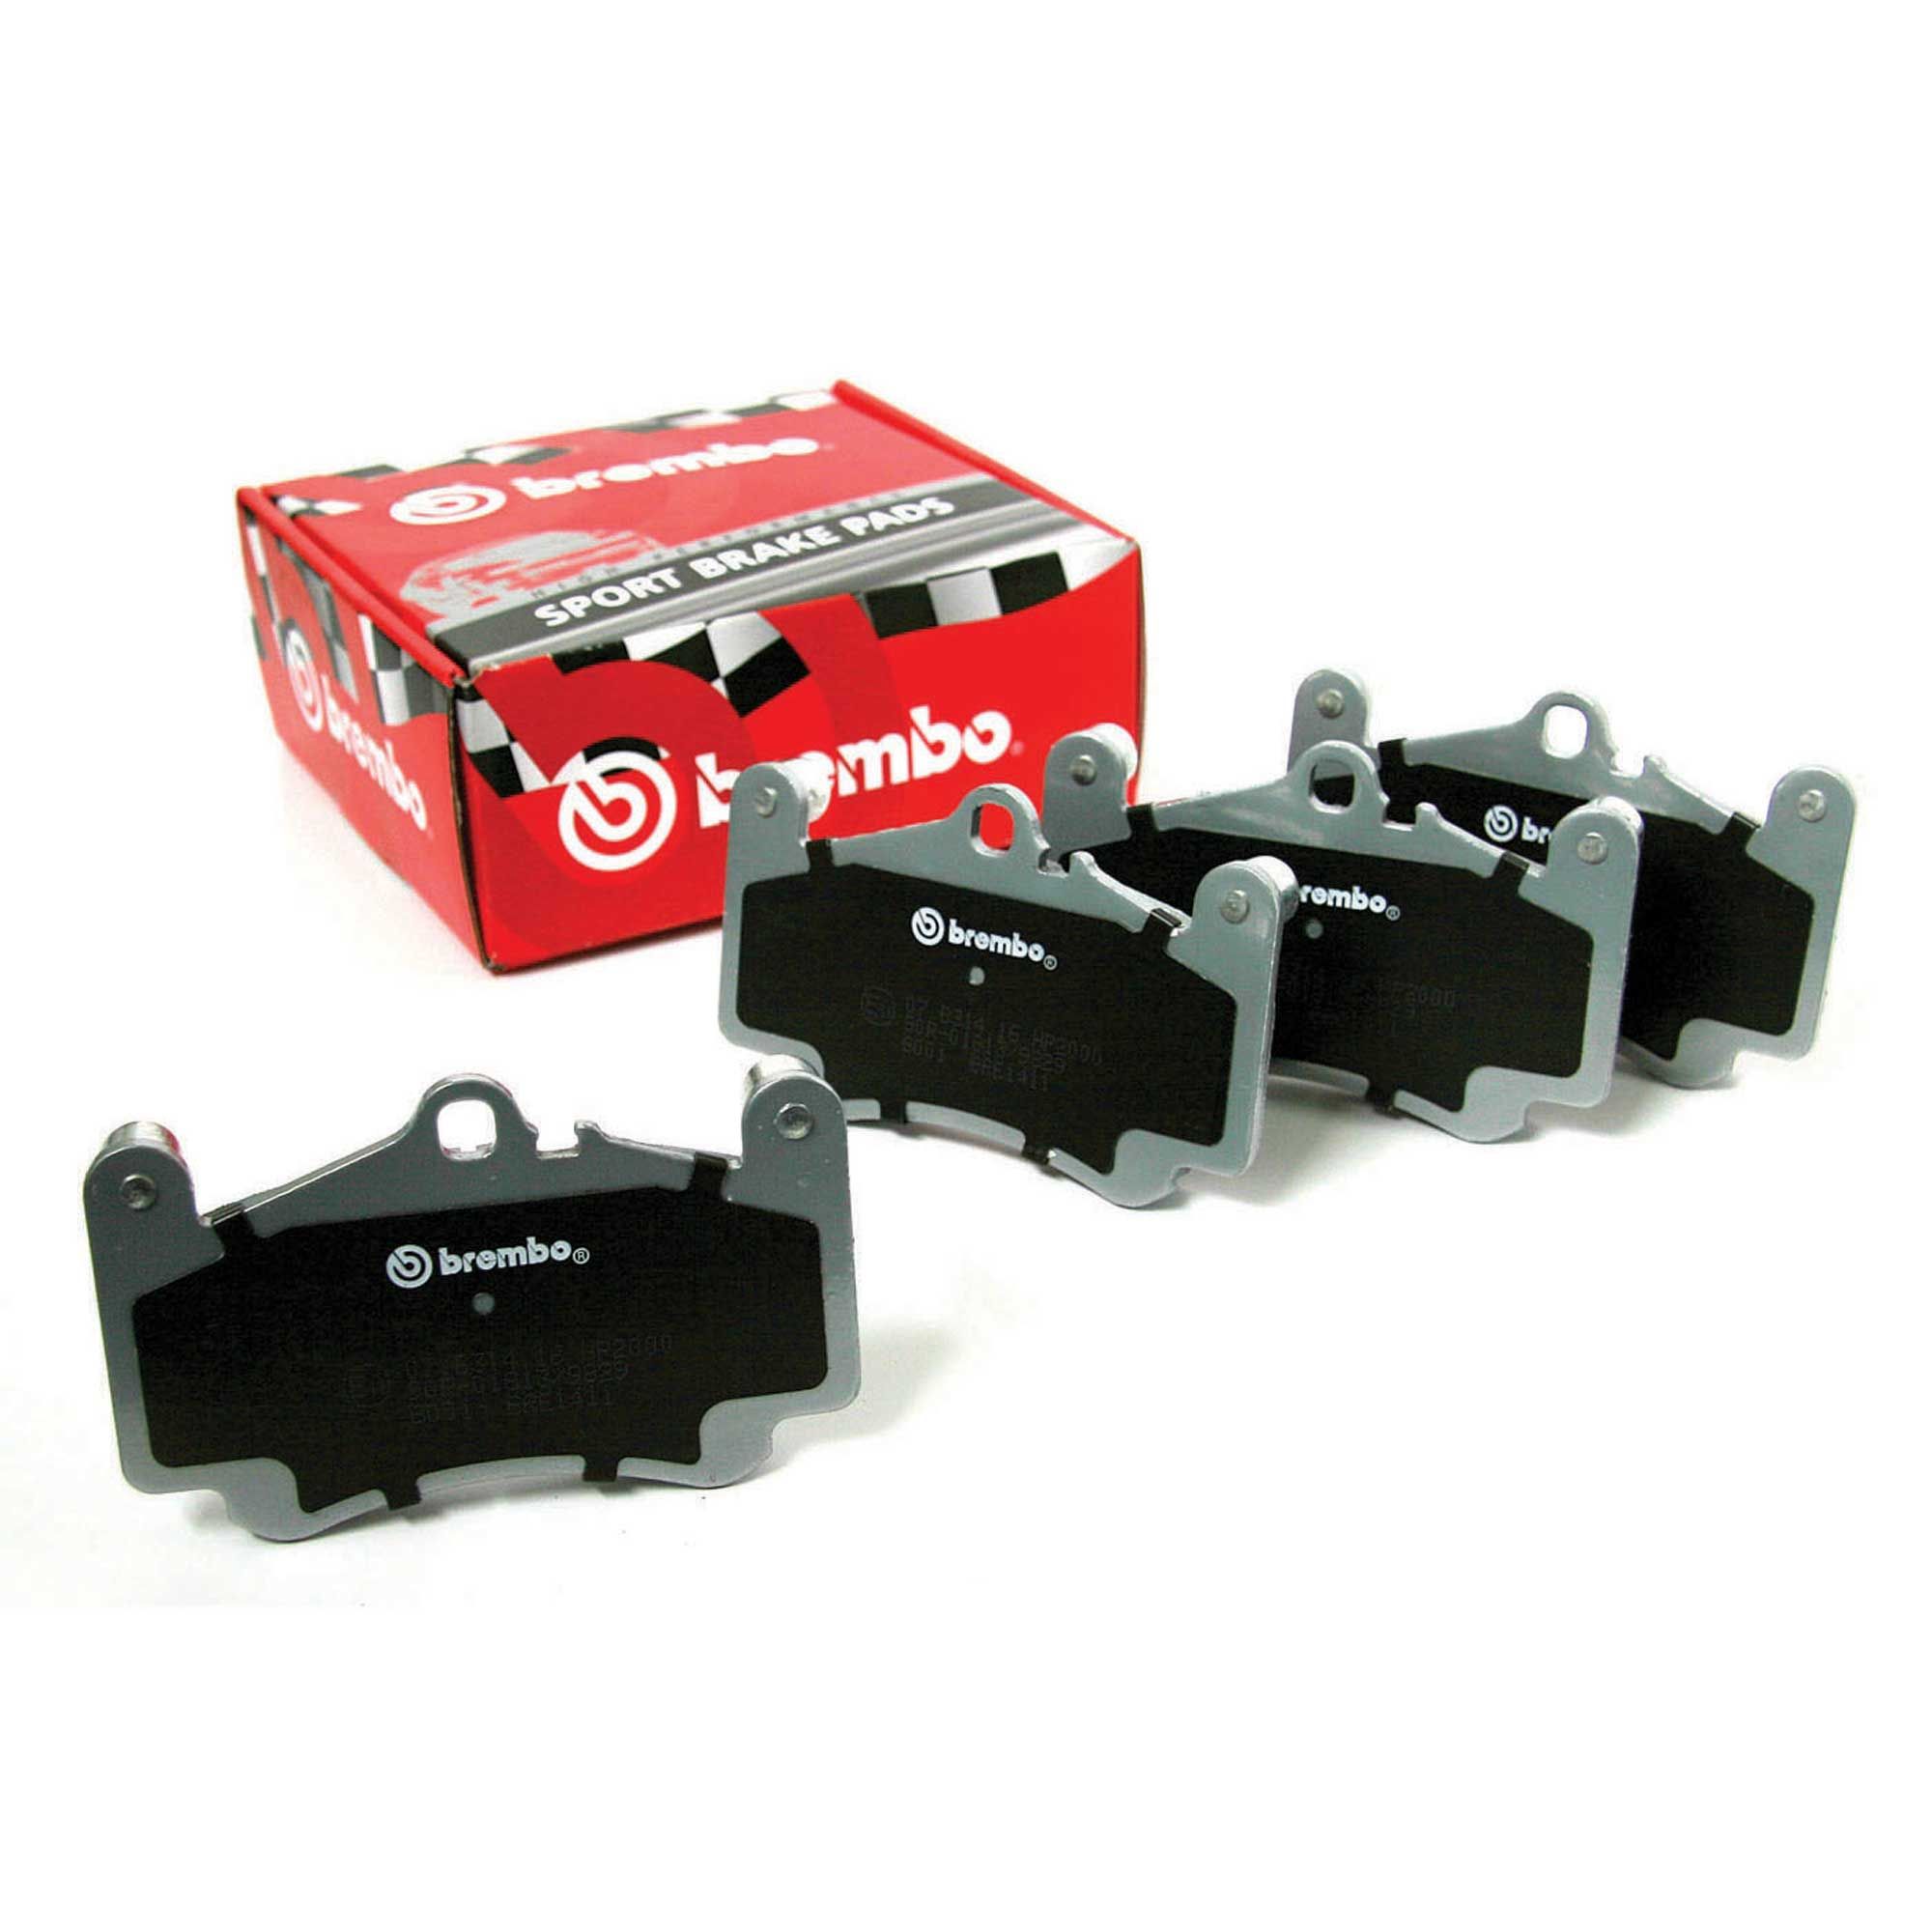 Brembo OE Replacement Brake Pads - Kart & Go